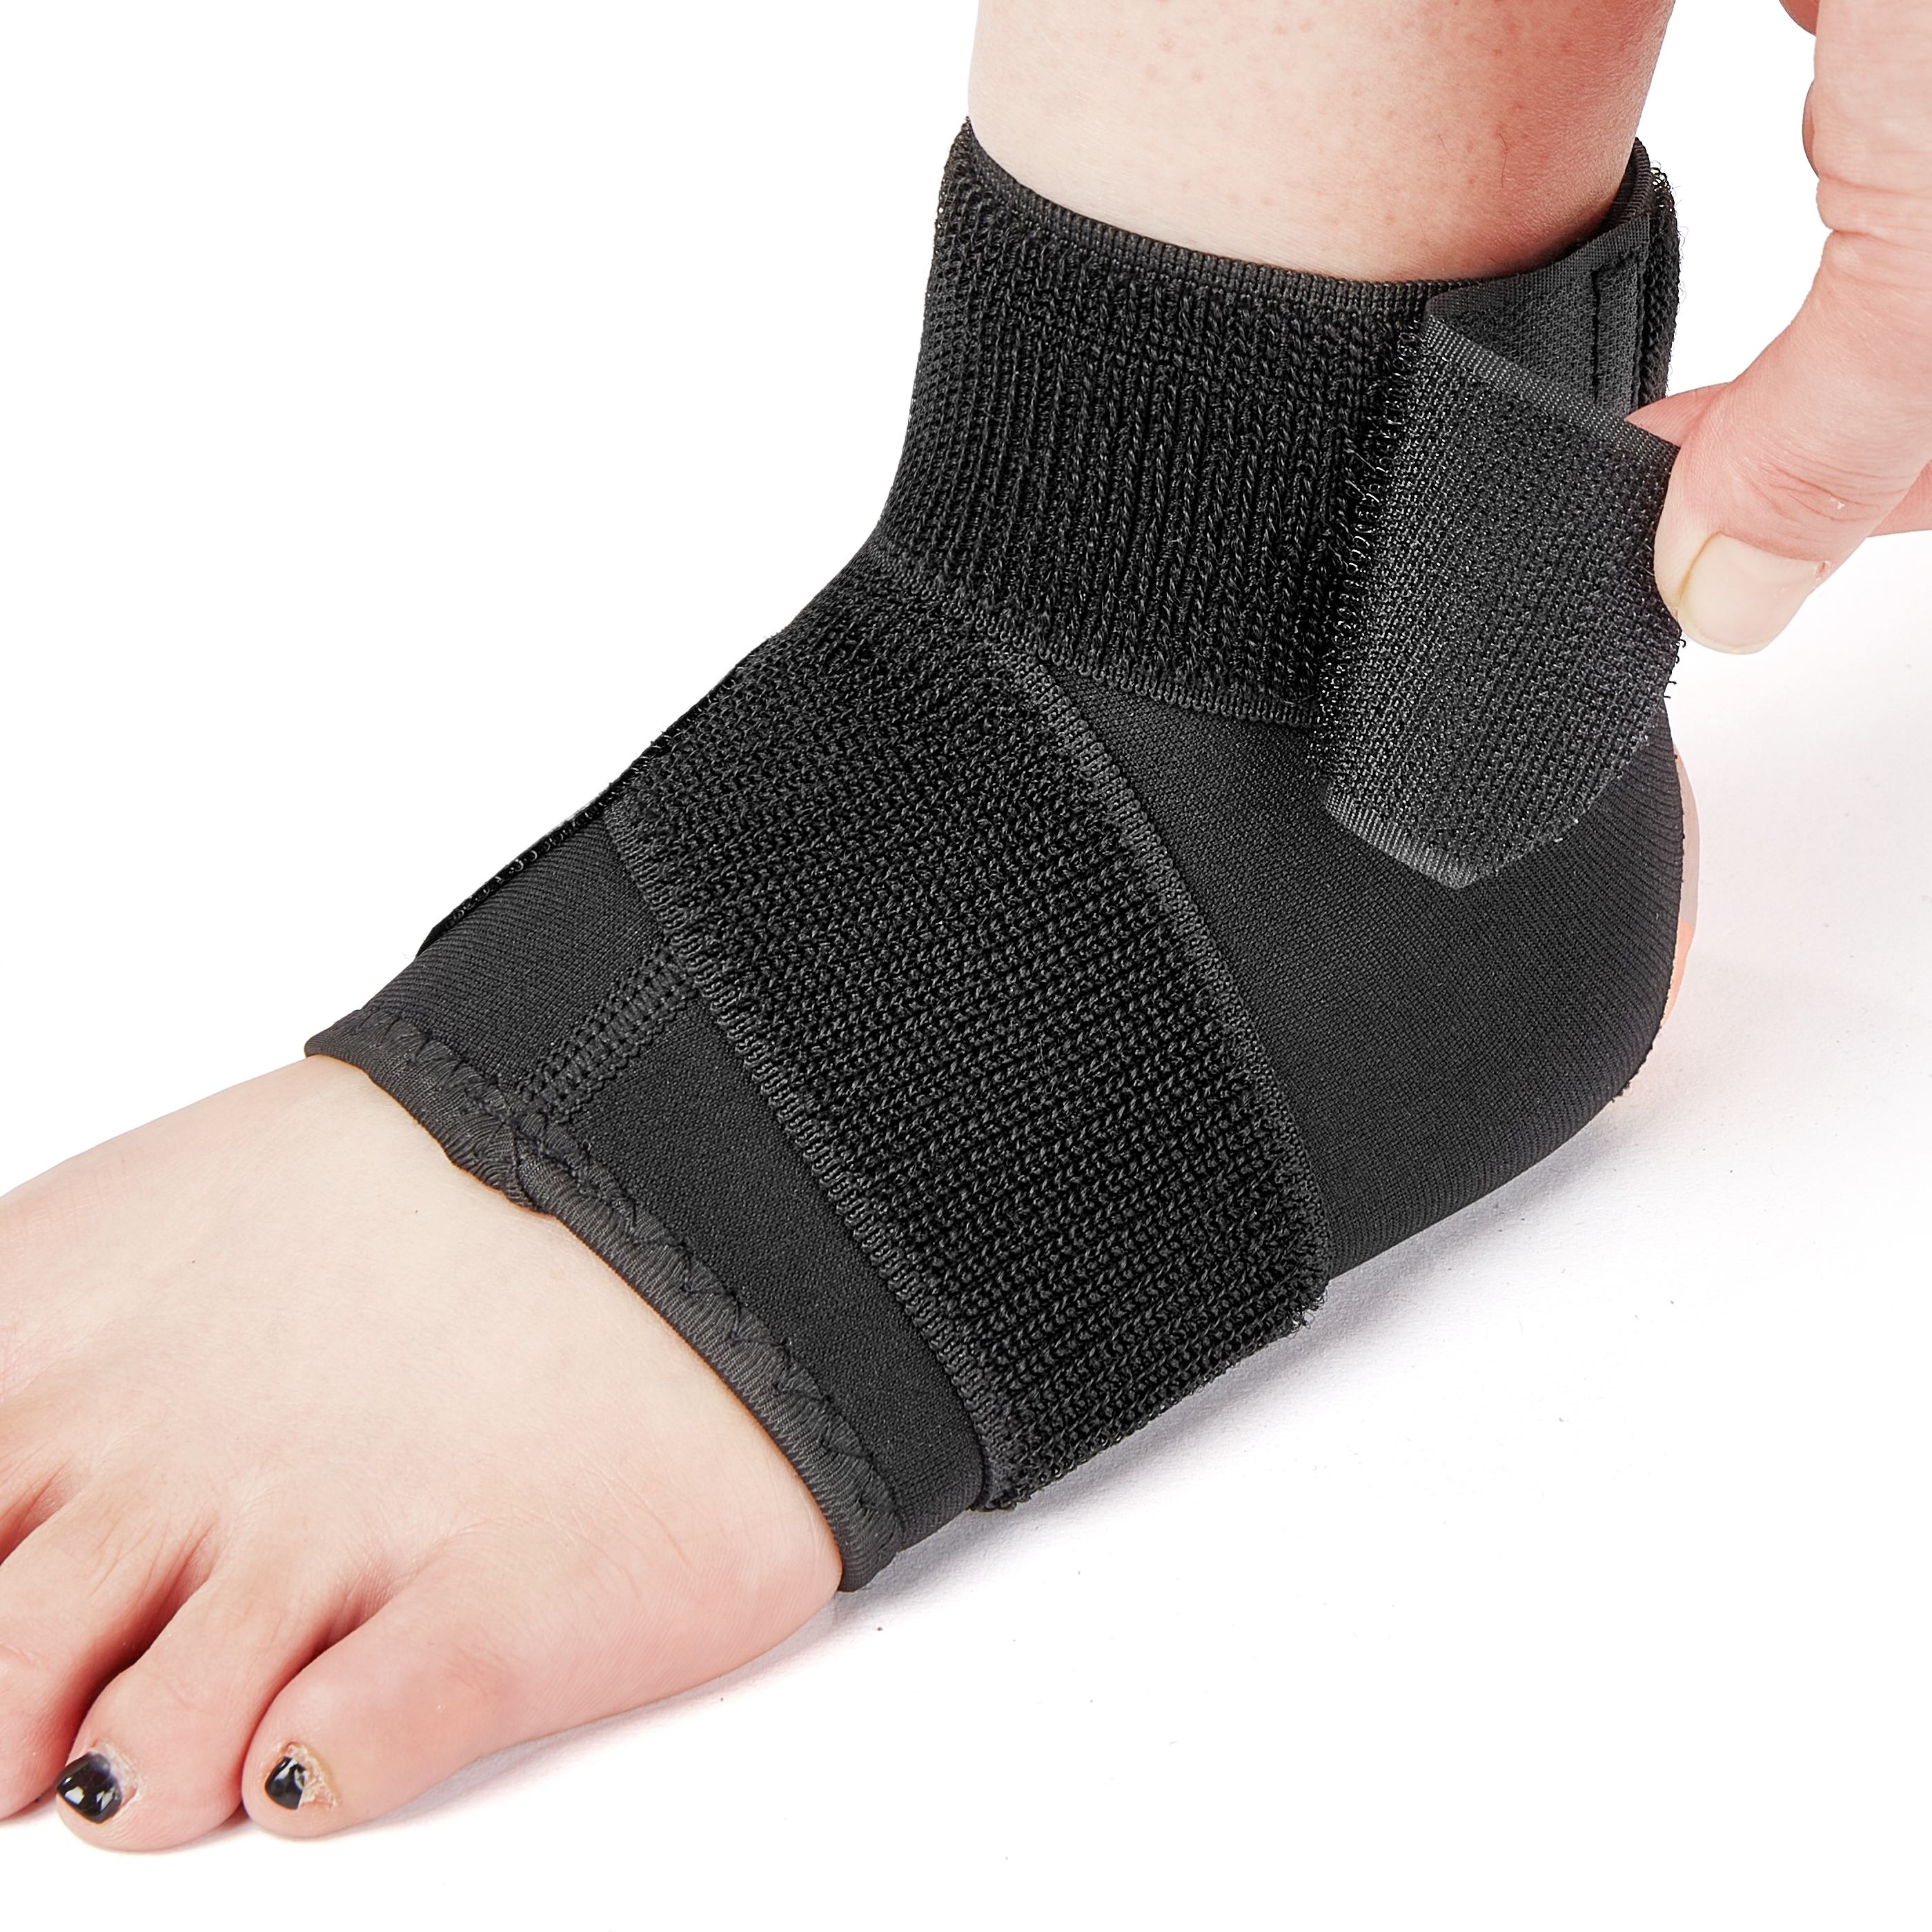 Ankle Guard-06